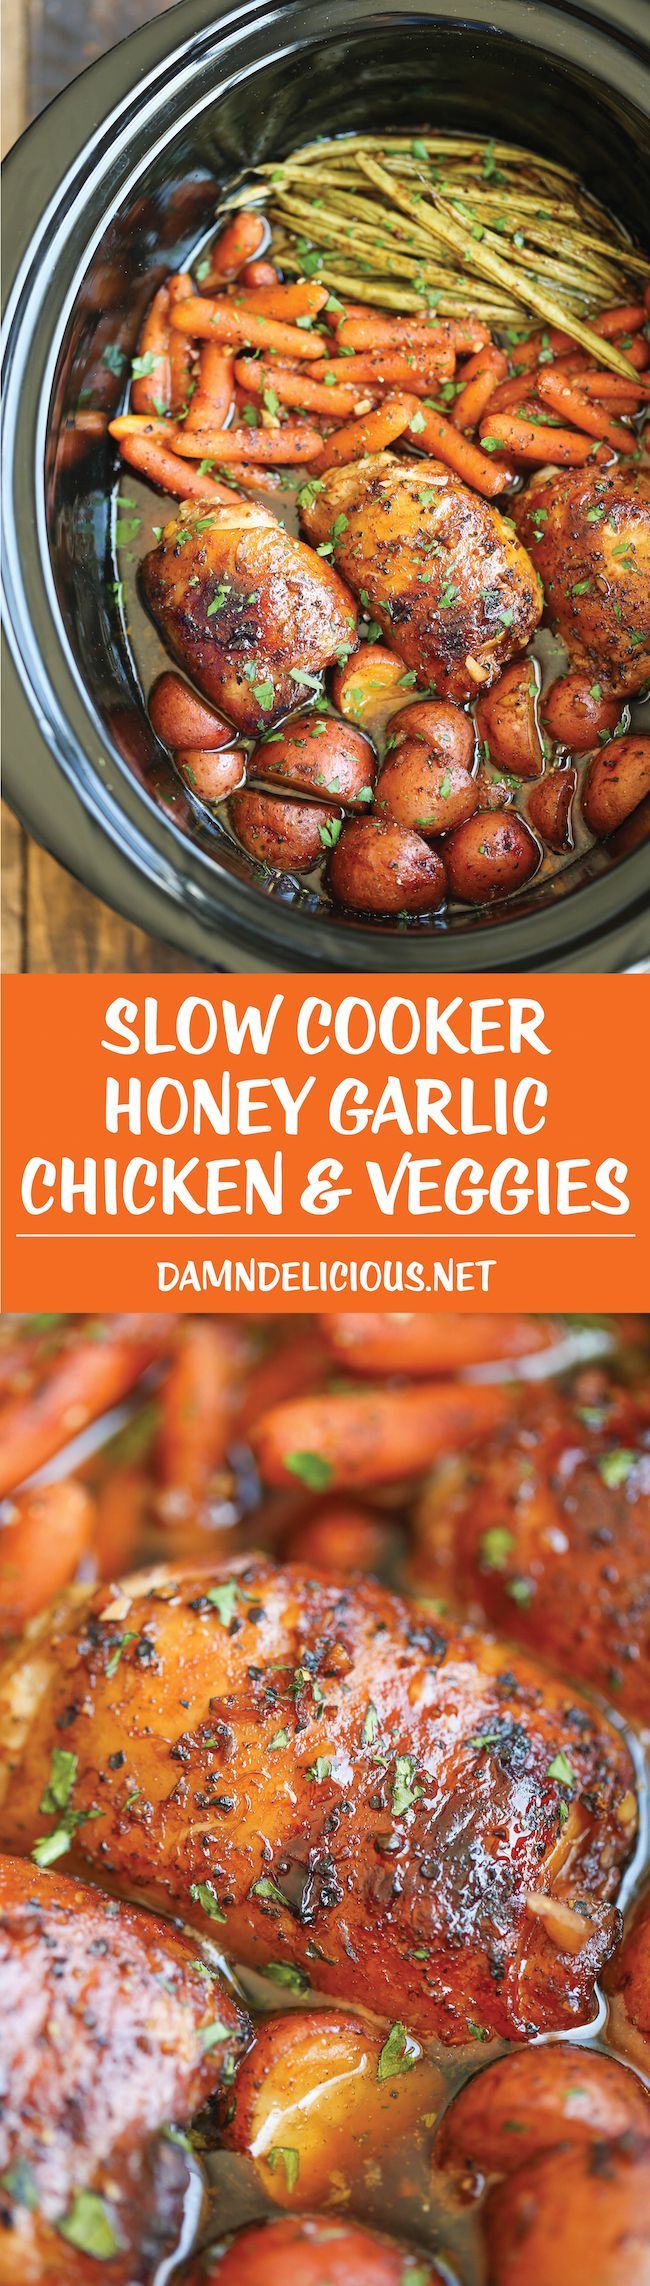 Slow Cooker Honey Garlic Chicken and Veggies – The easiest one pot recipe ever. Simply throw everything in